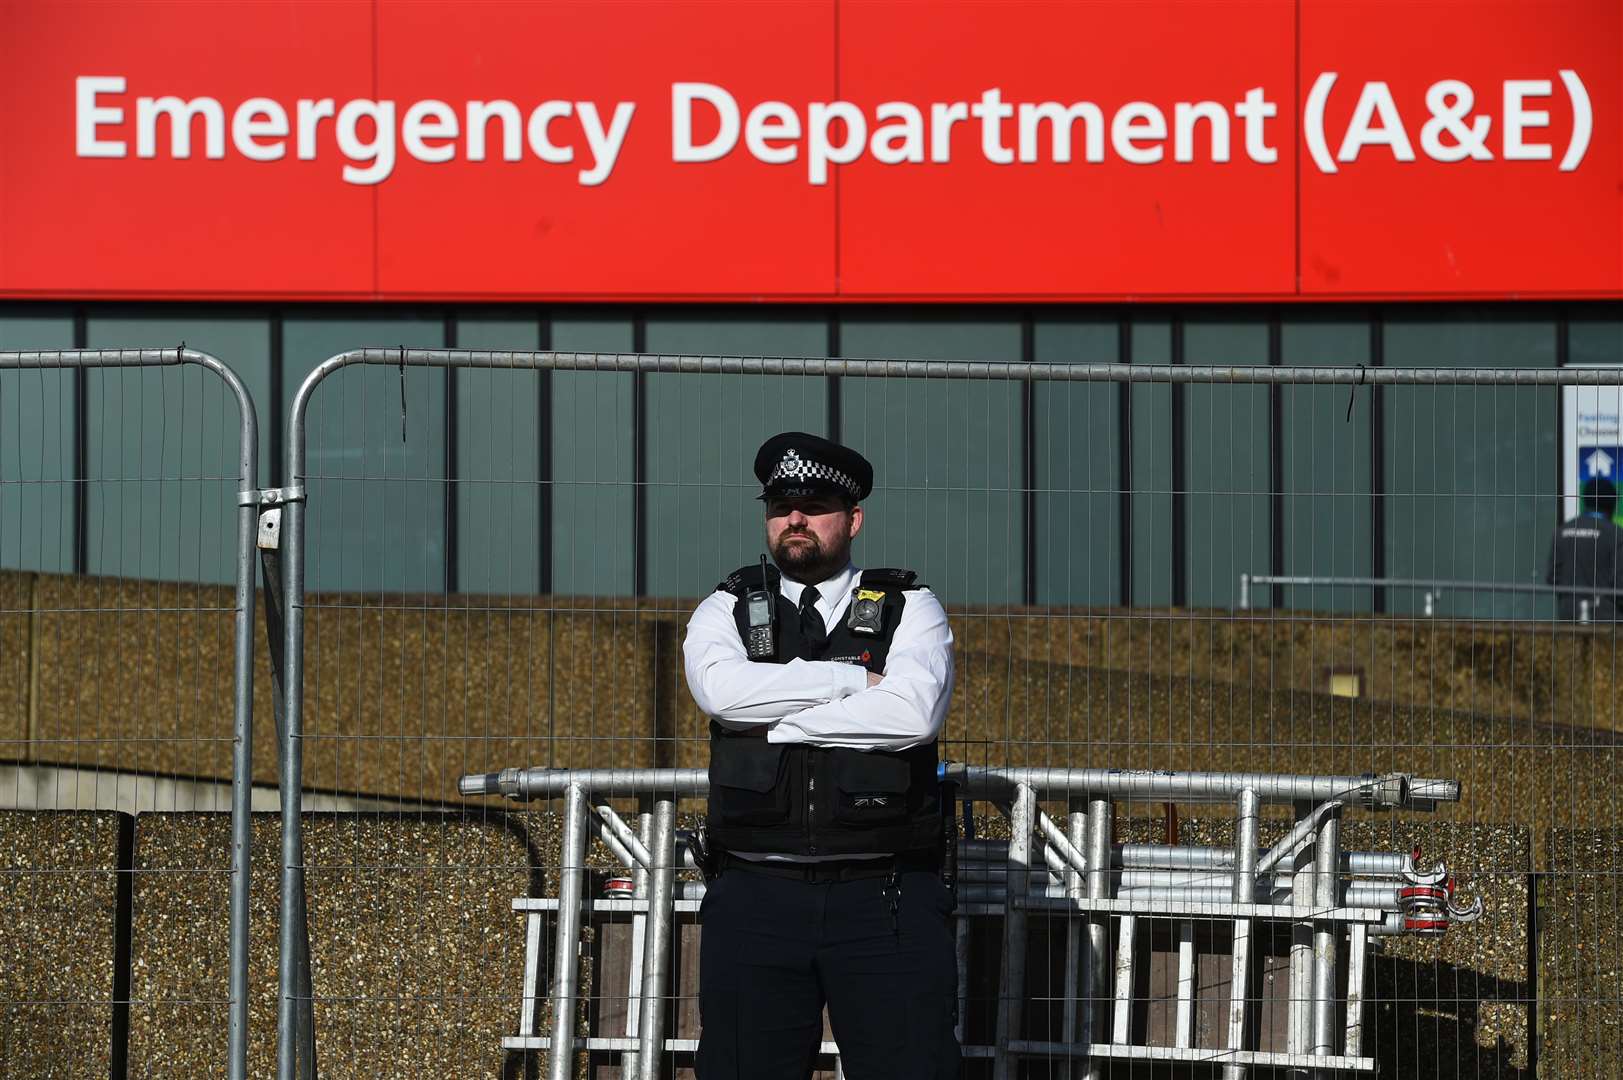 Police on patrol outside St Thomas’ Hospital (Kirsty O’Connor/PA)